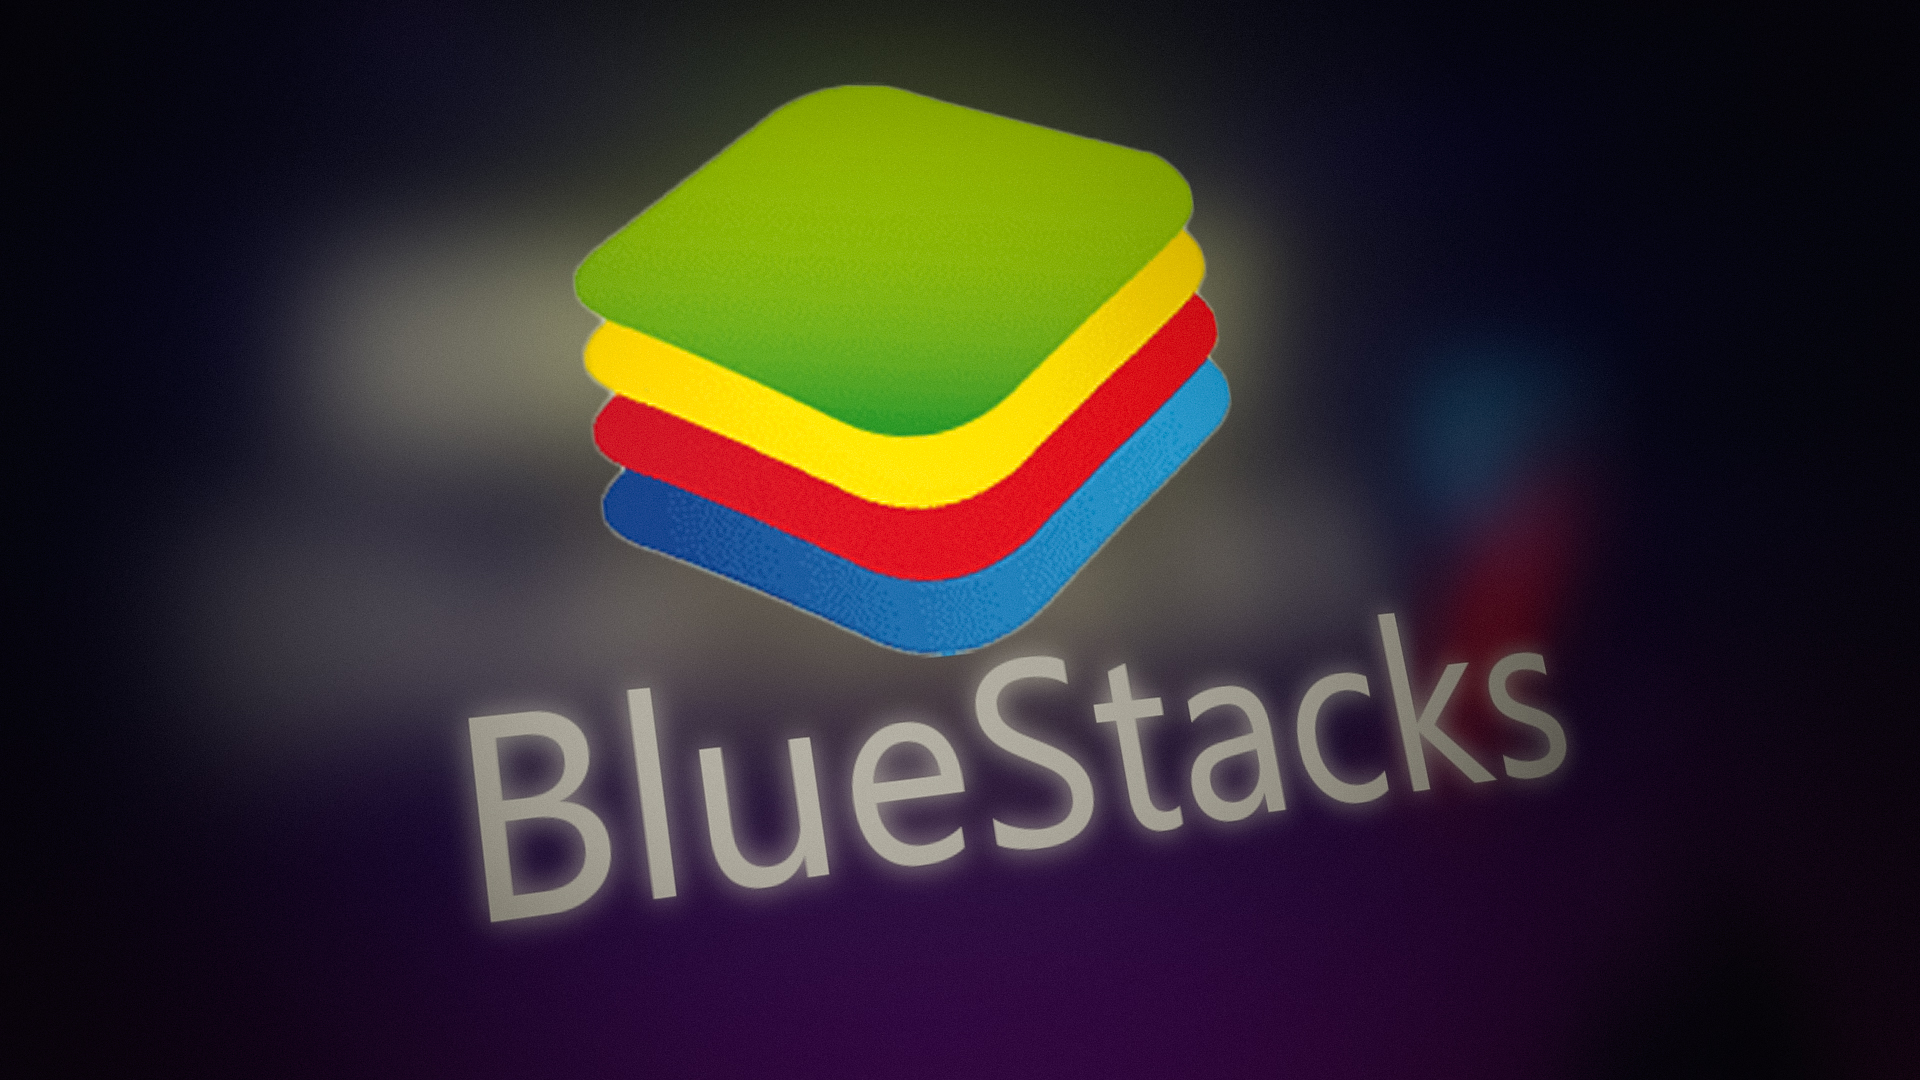 How to Root Bluestacks on Windows Easily